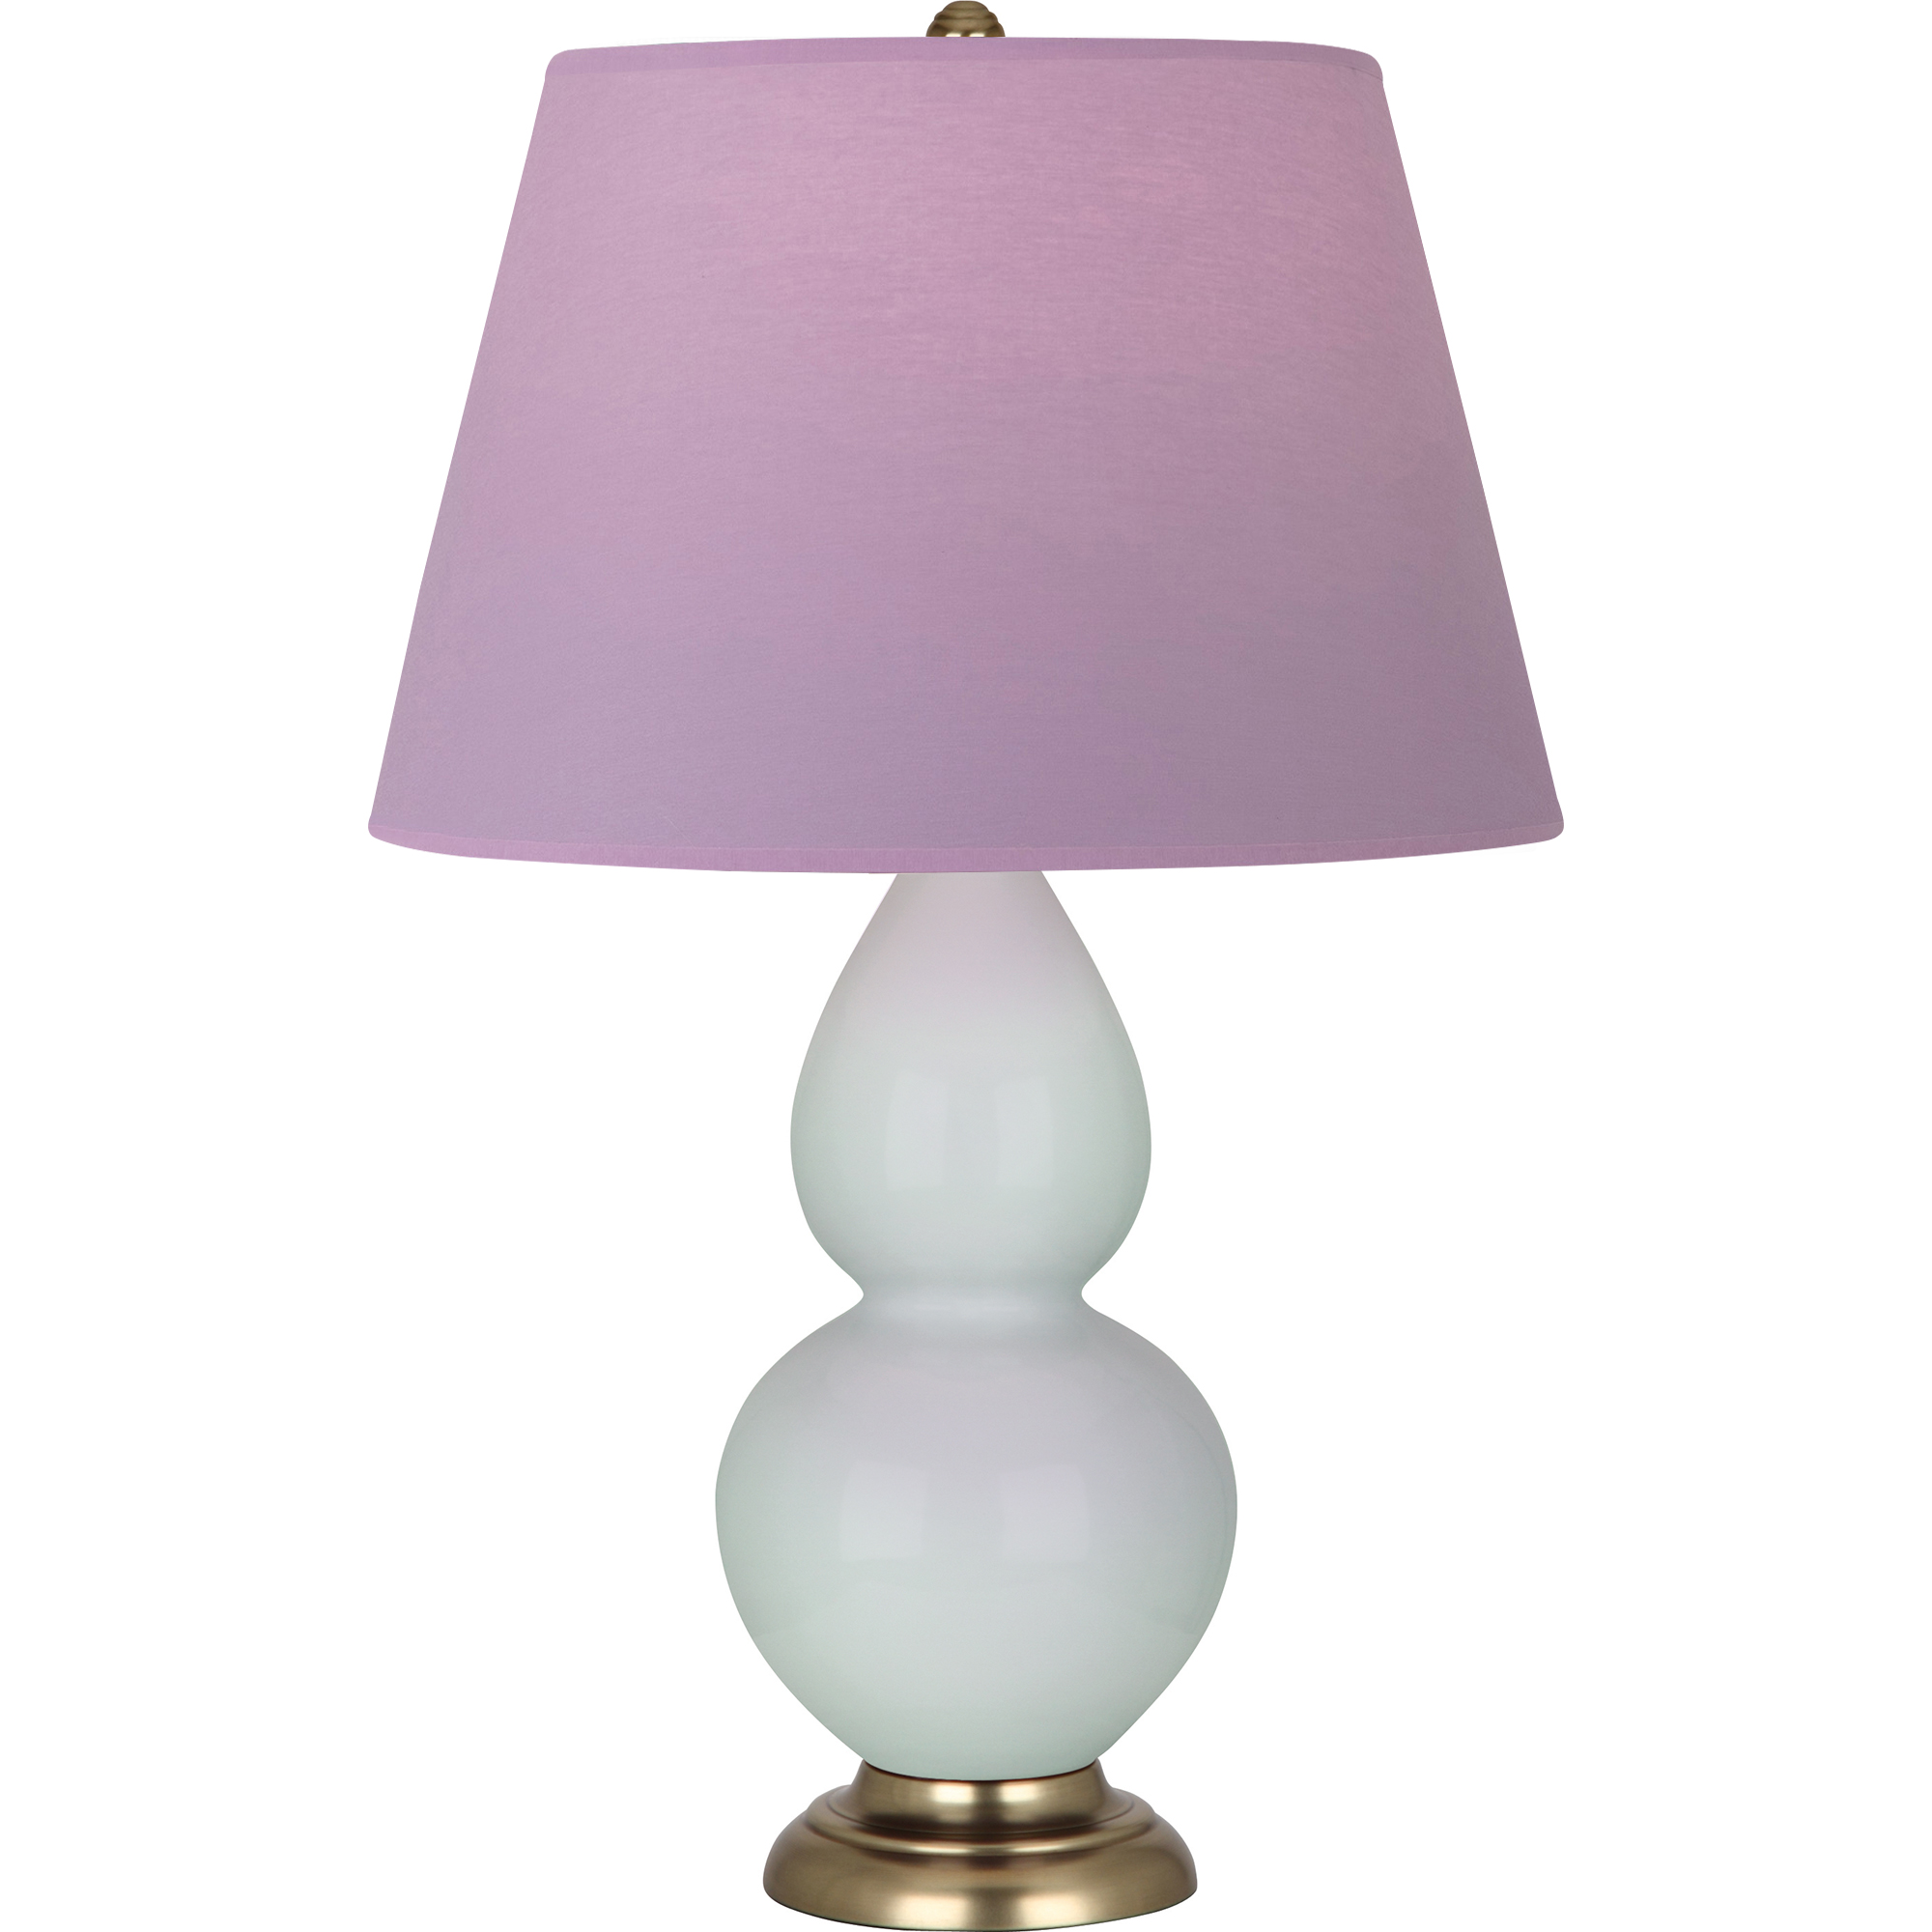 Double Gourd Table Lamp Style #1789L